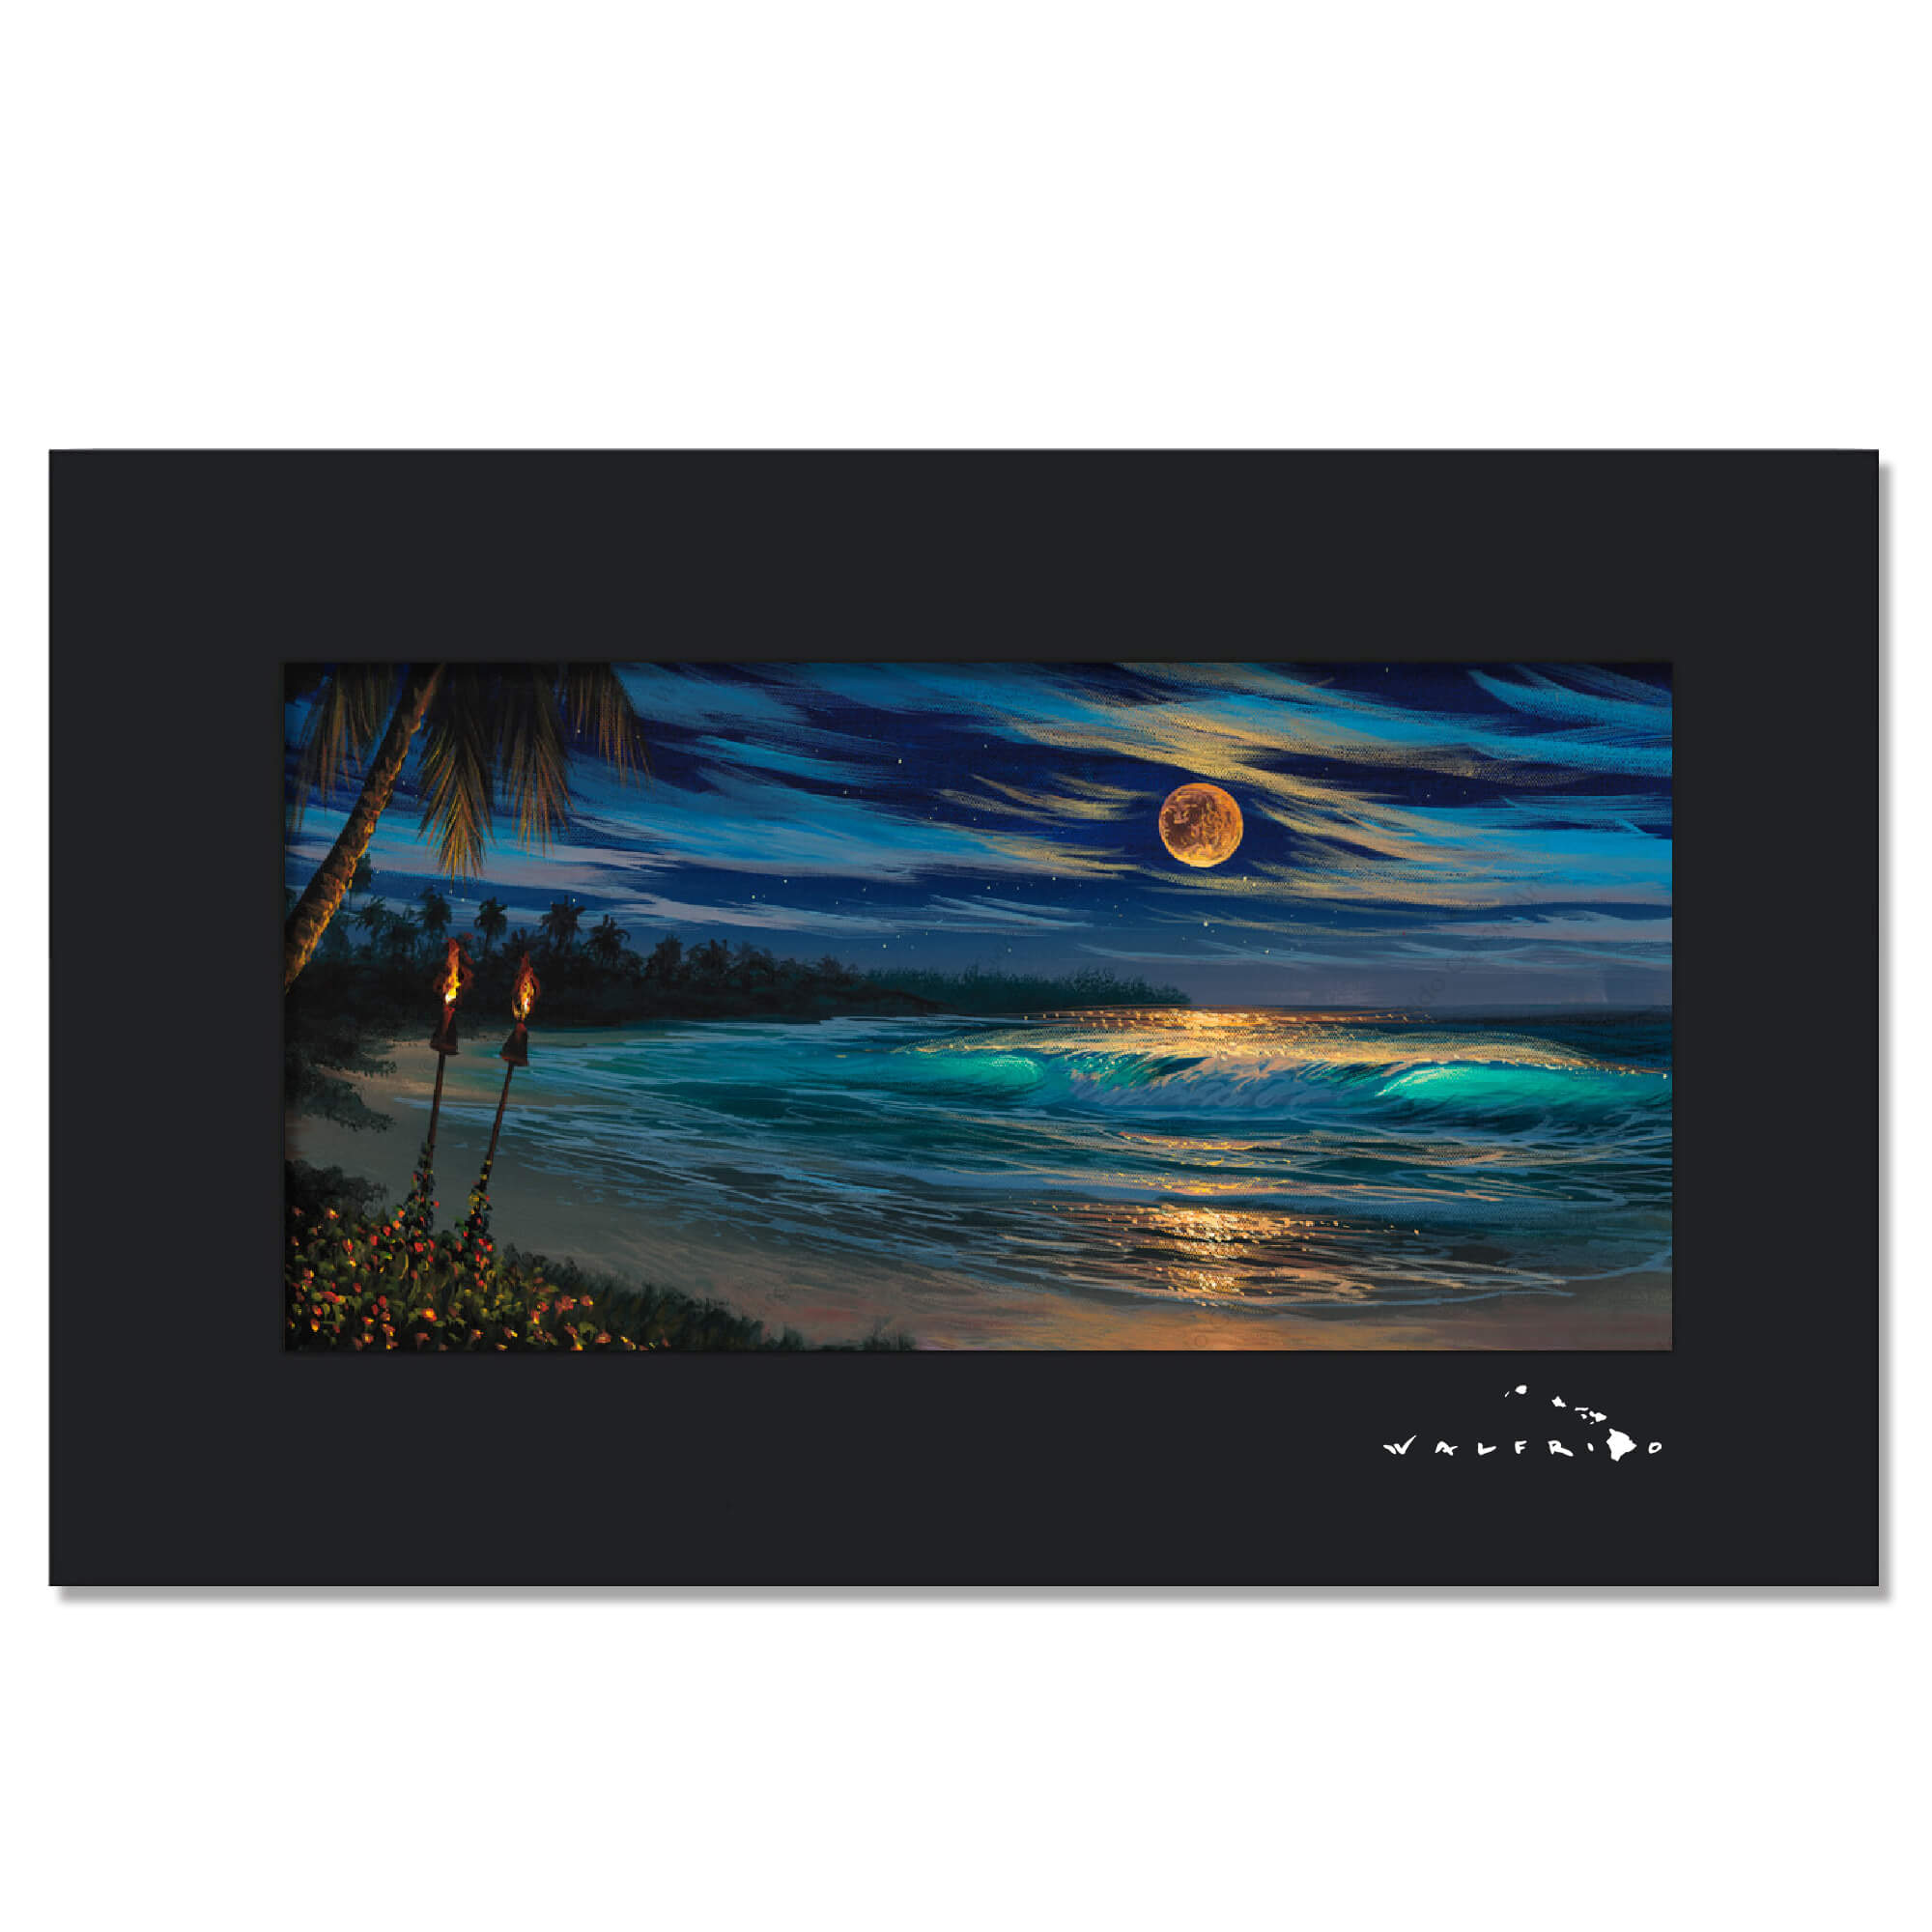 The TIKI MOON Mellow & Moody South Pacific Art Print by Capt